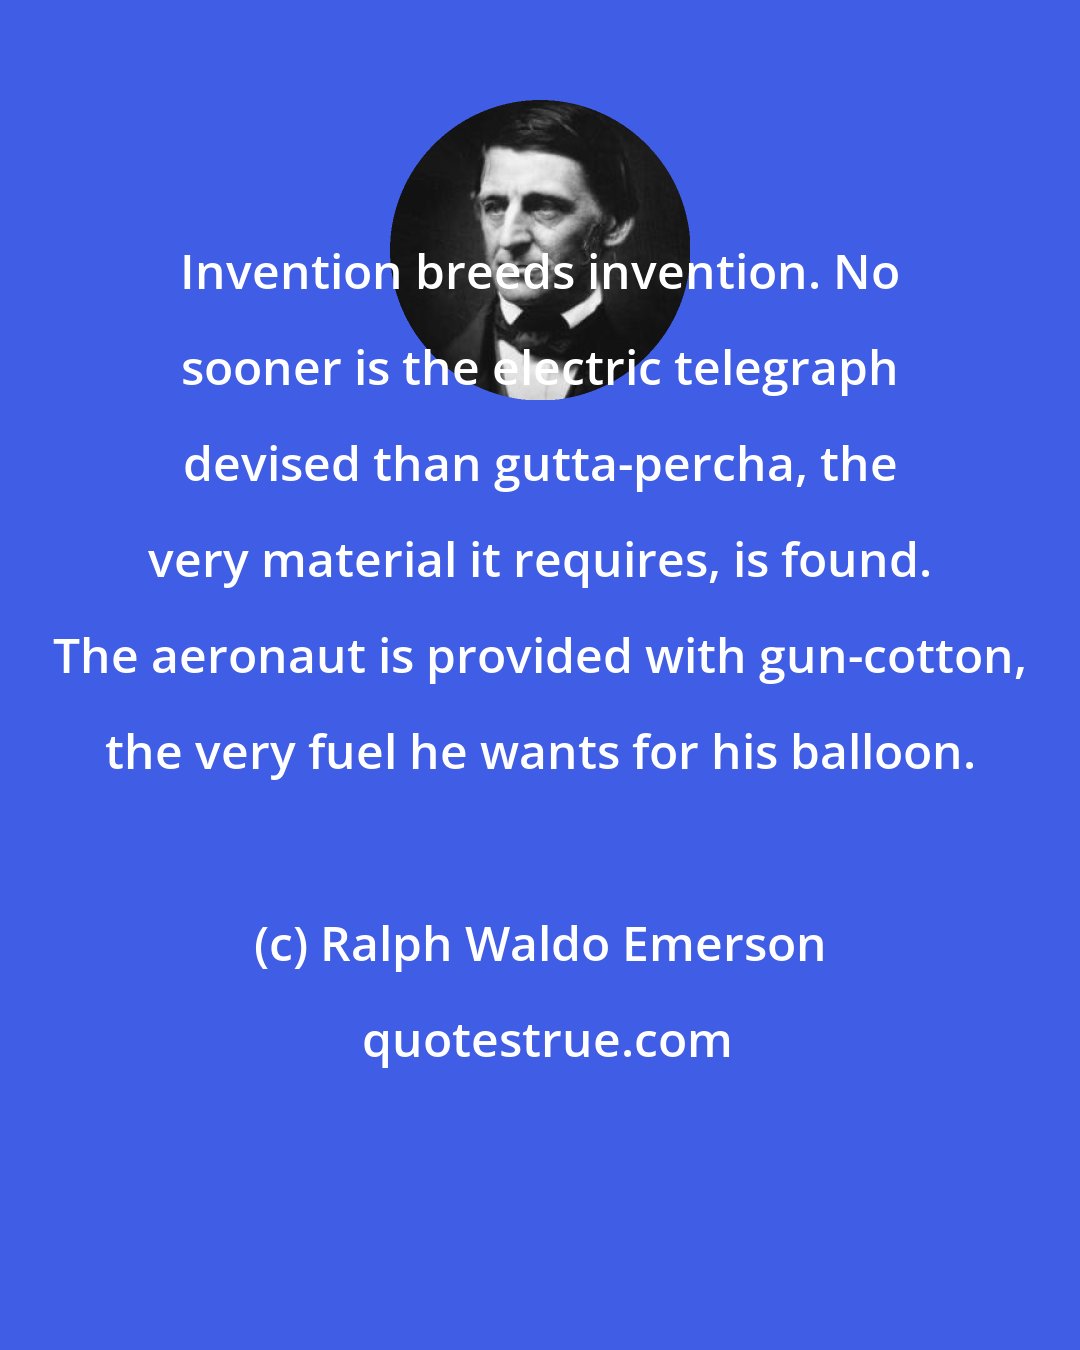 Ralph Waldo Emerson: Invention breeds invention. No sooner is the electric telegraph devised than gutta-percha, the very material it requires, is found. The aeronaut is provided with gun-cotton, the very fuel he wants for his balloon.